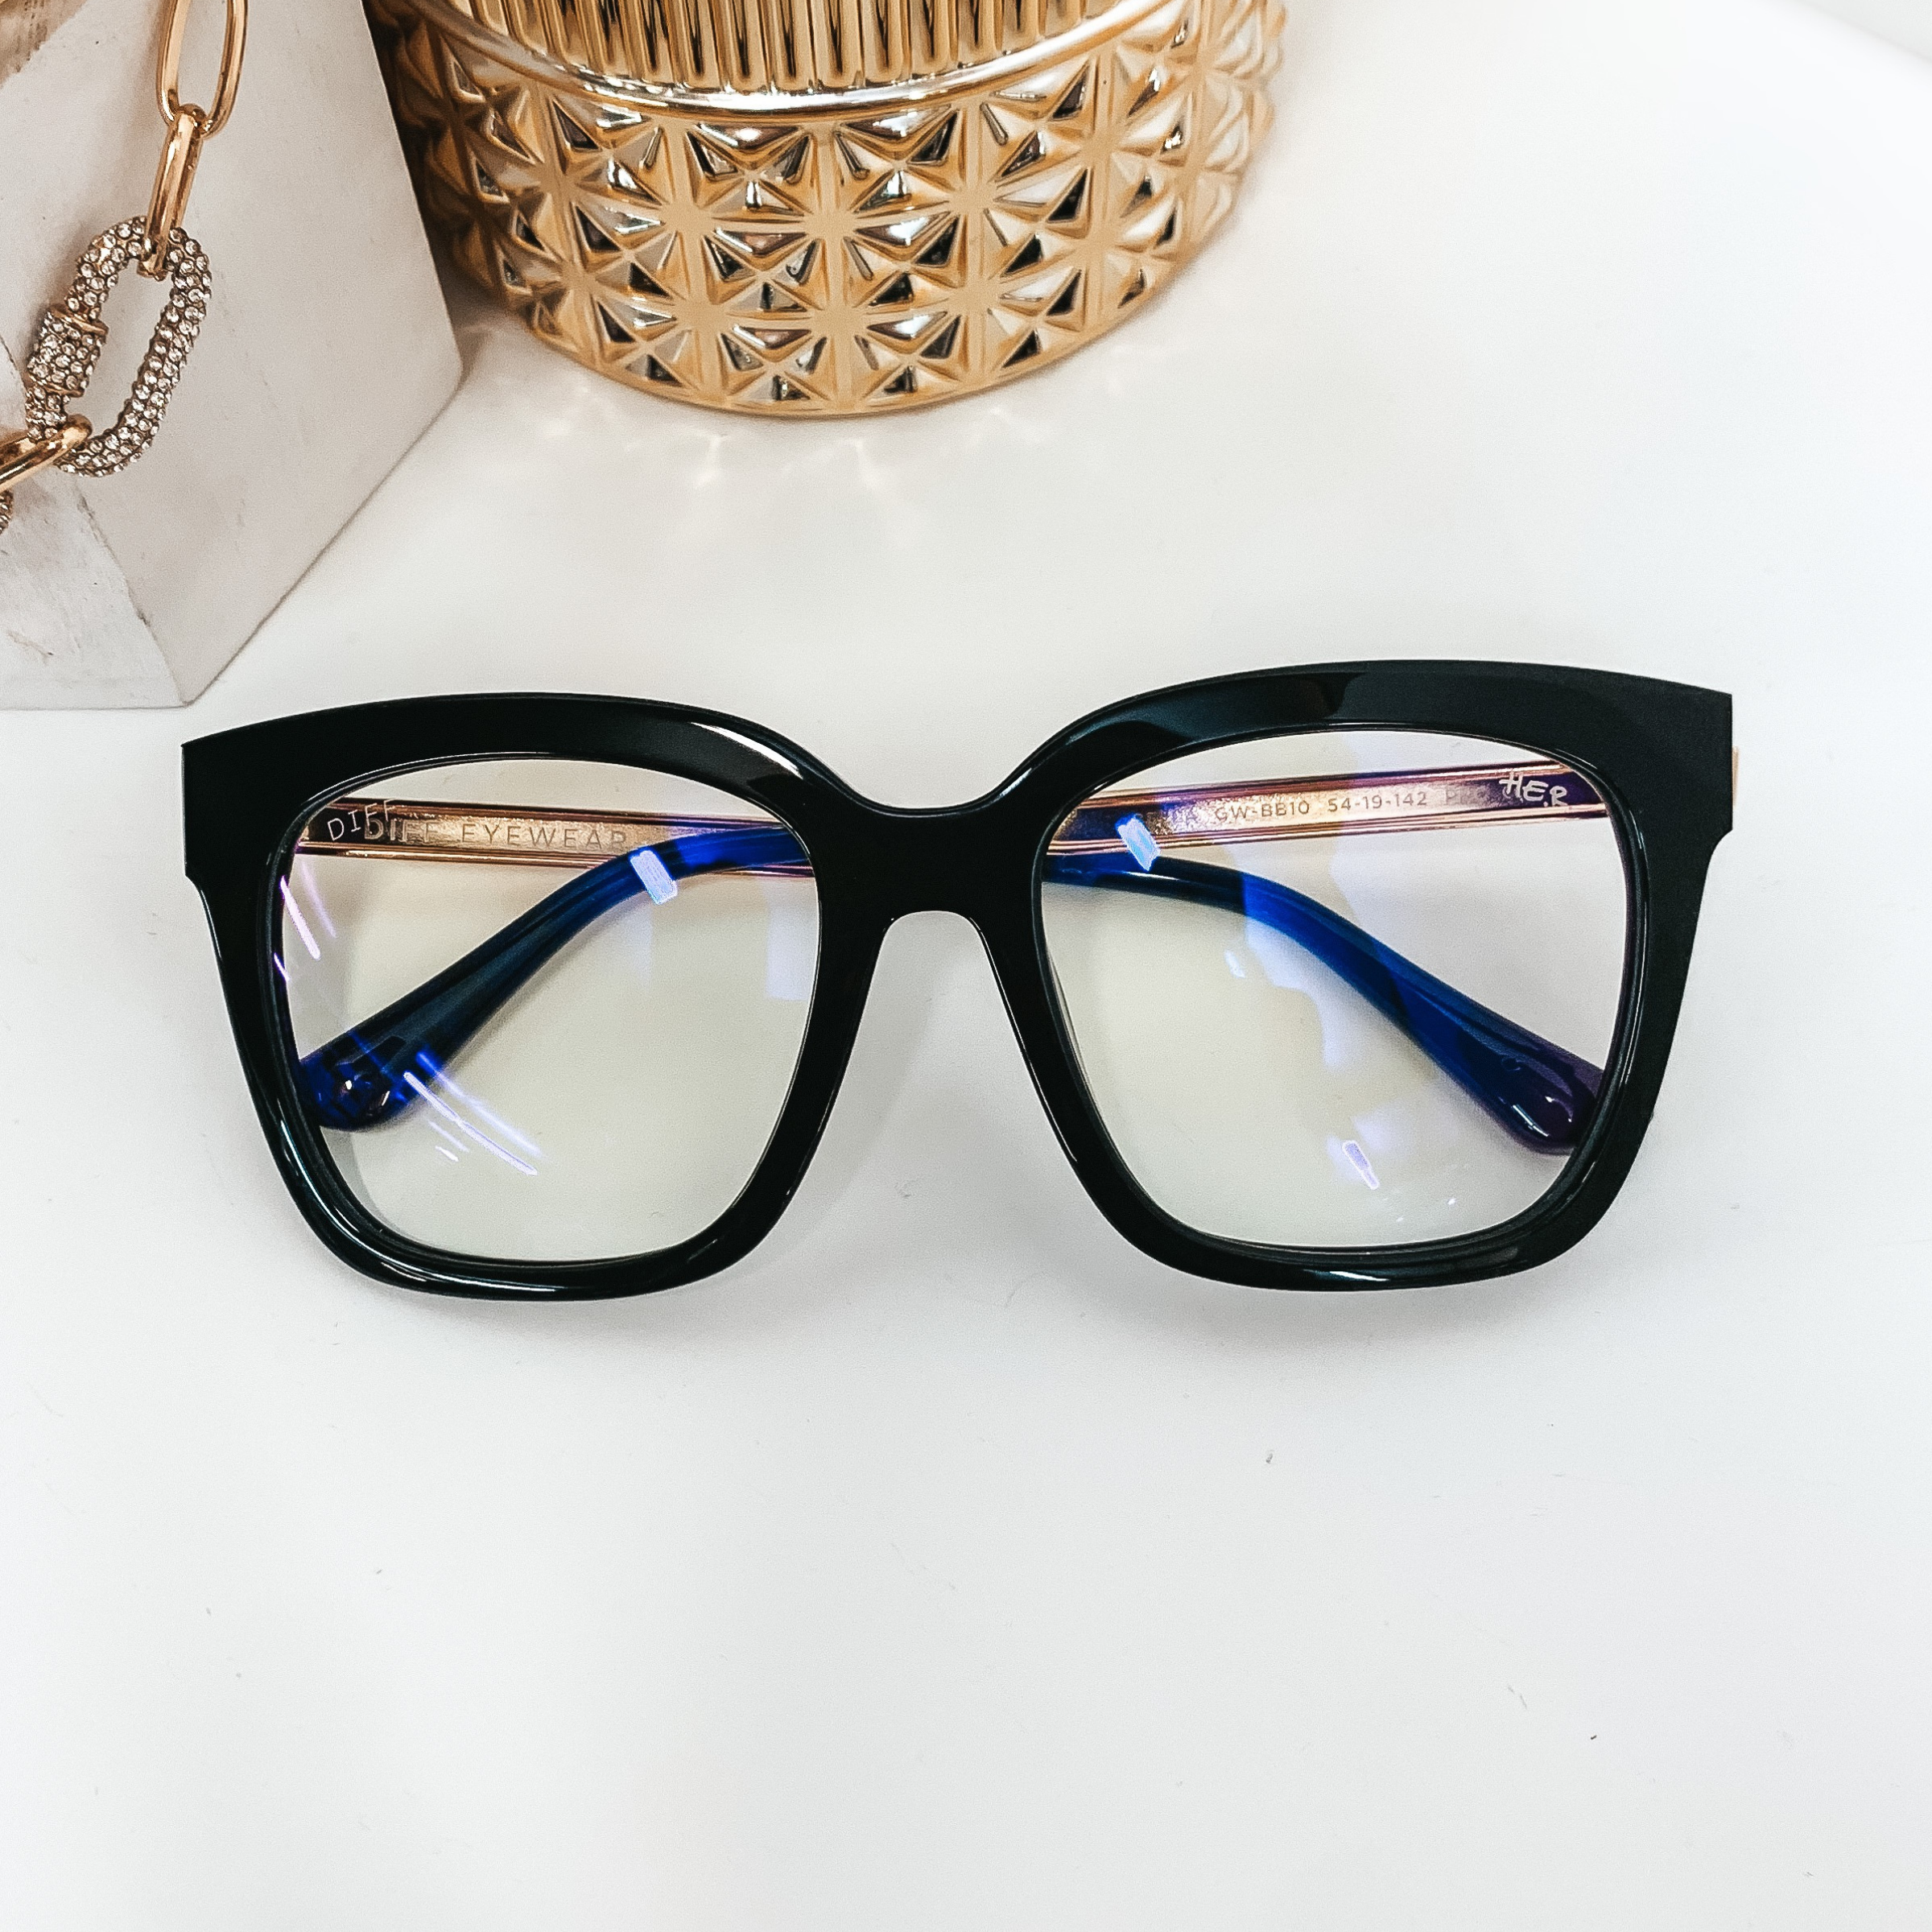 DIFF x H.E.R. | Bella Blue Light Tech Lens Glasses in Black and Gold - Giddy Up Glamour Boutique